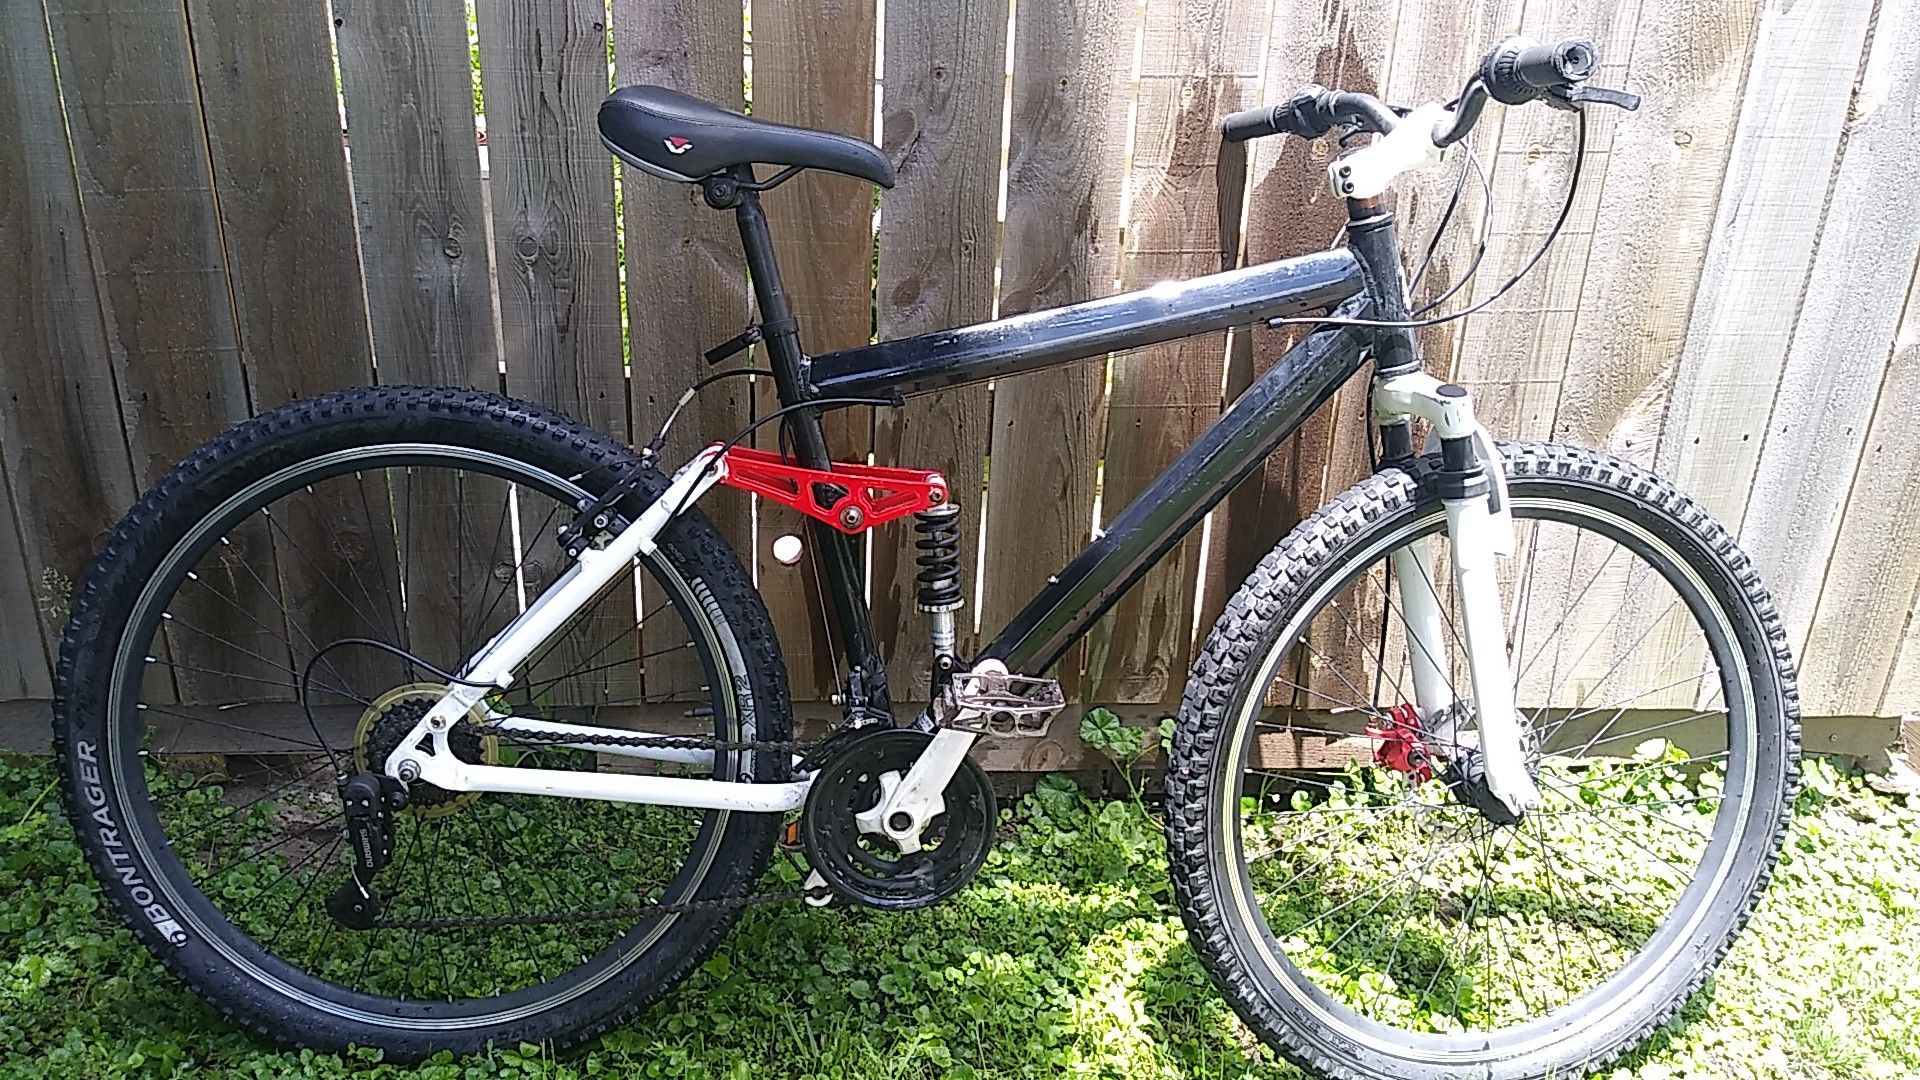 Genesis mountain bike Virgil a $179 to be yours today for $120.00 dollars or best offer